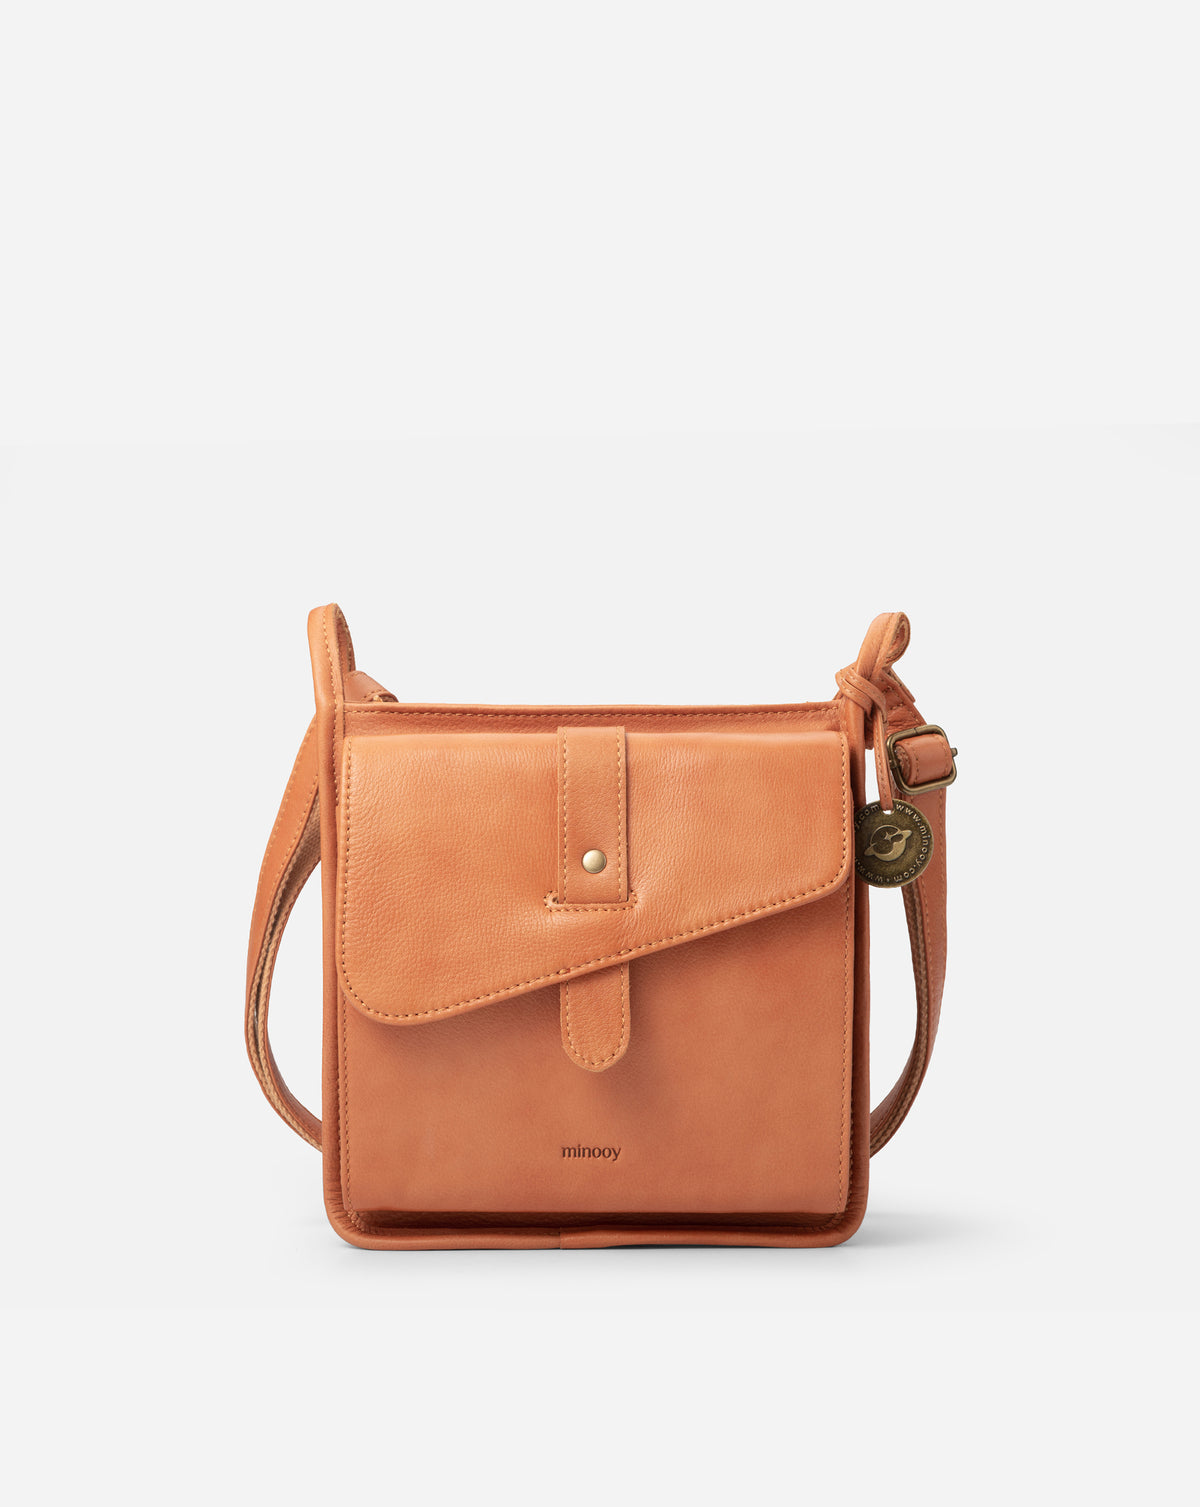 This Amazon crossbody bag is perfect for travel and everyday wear